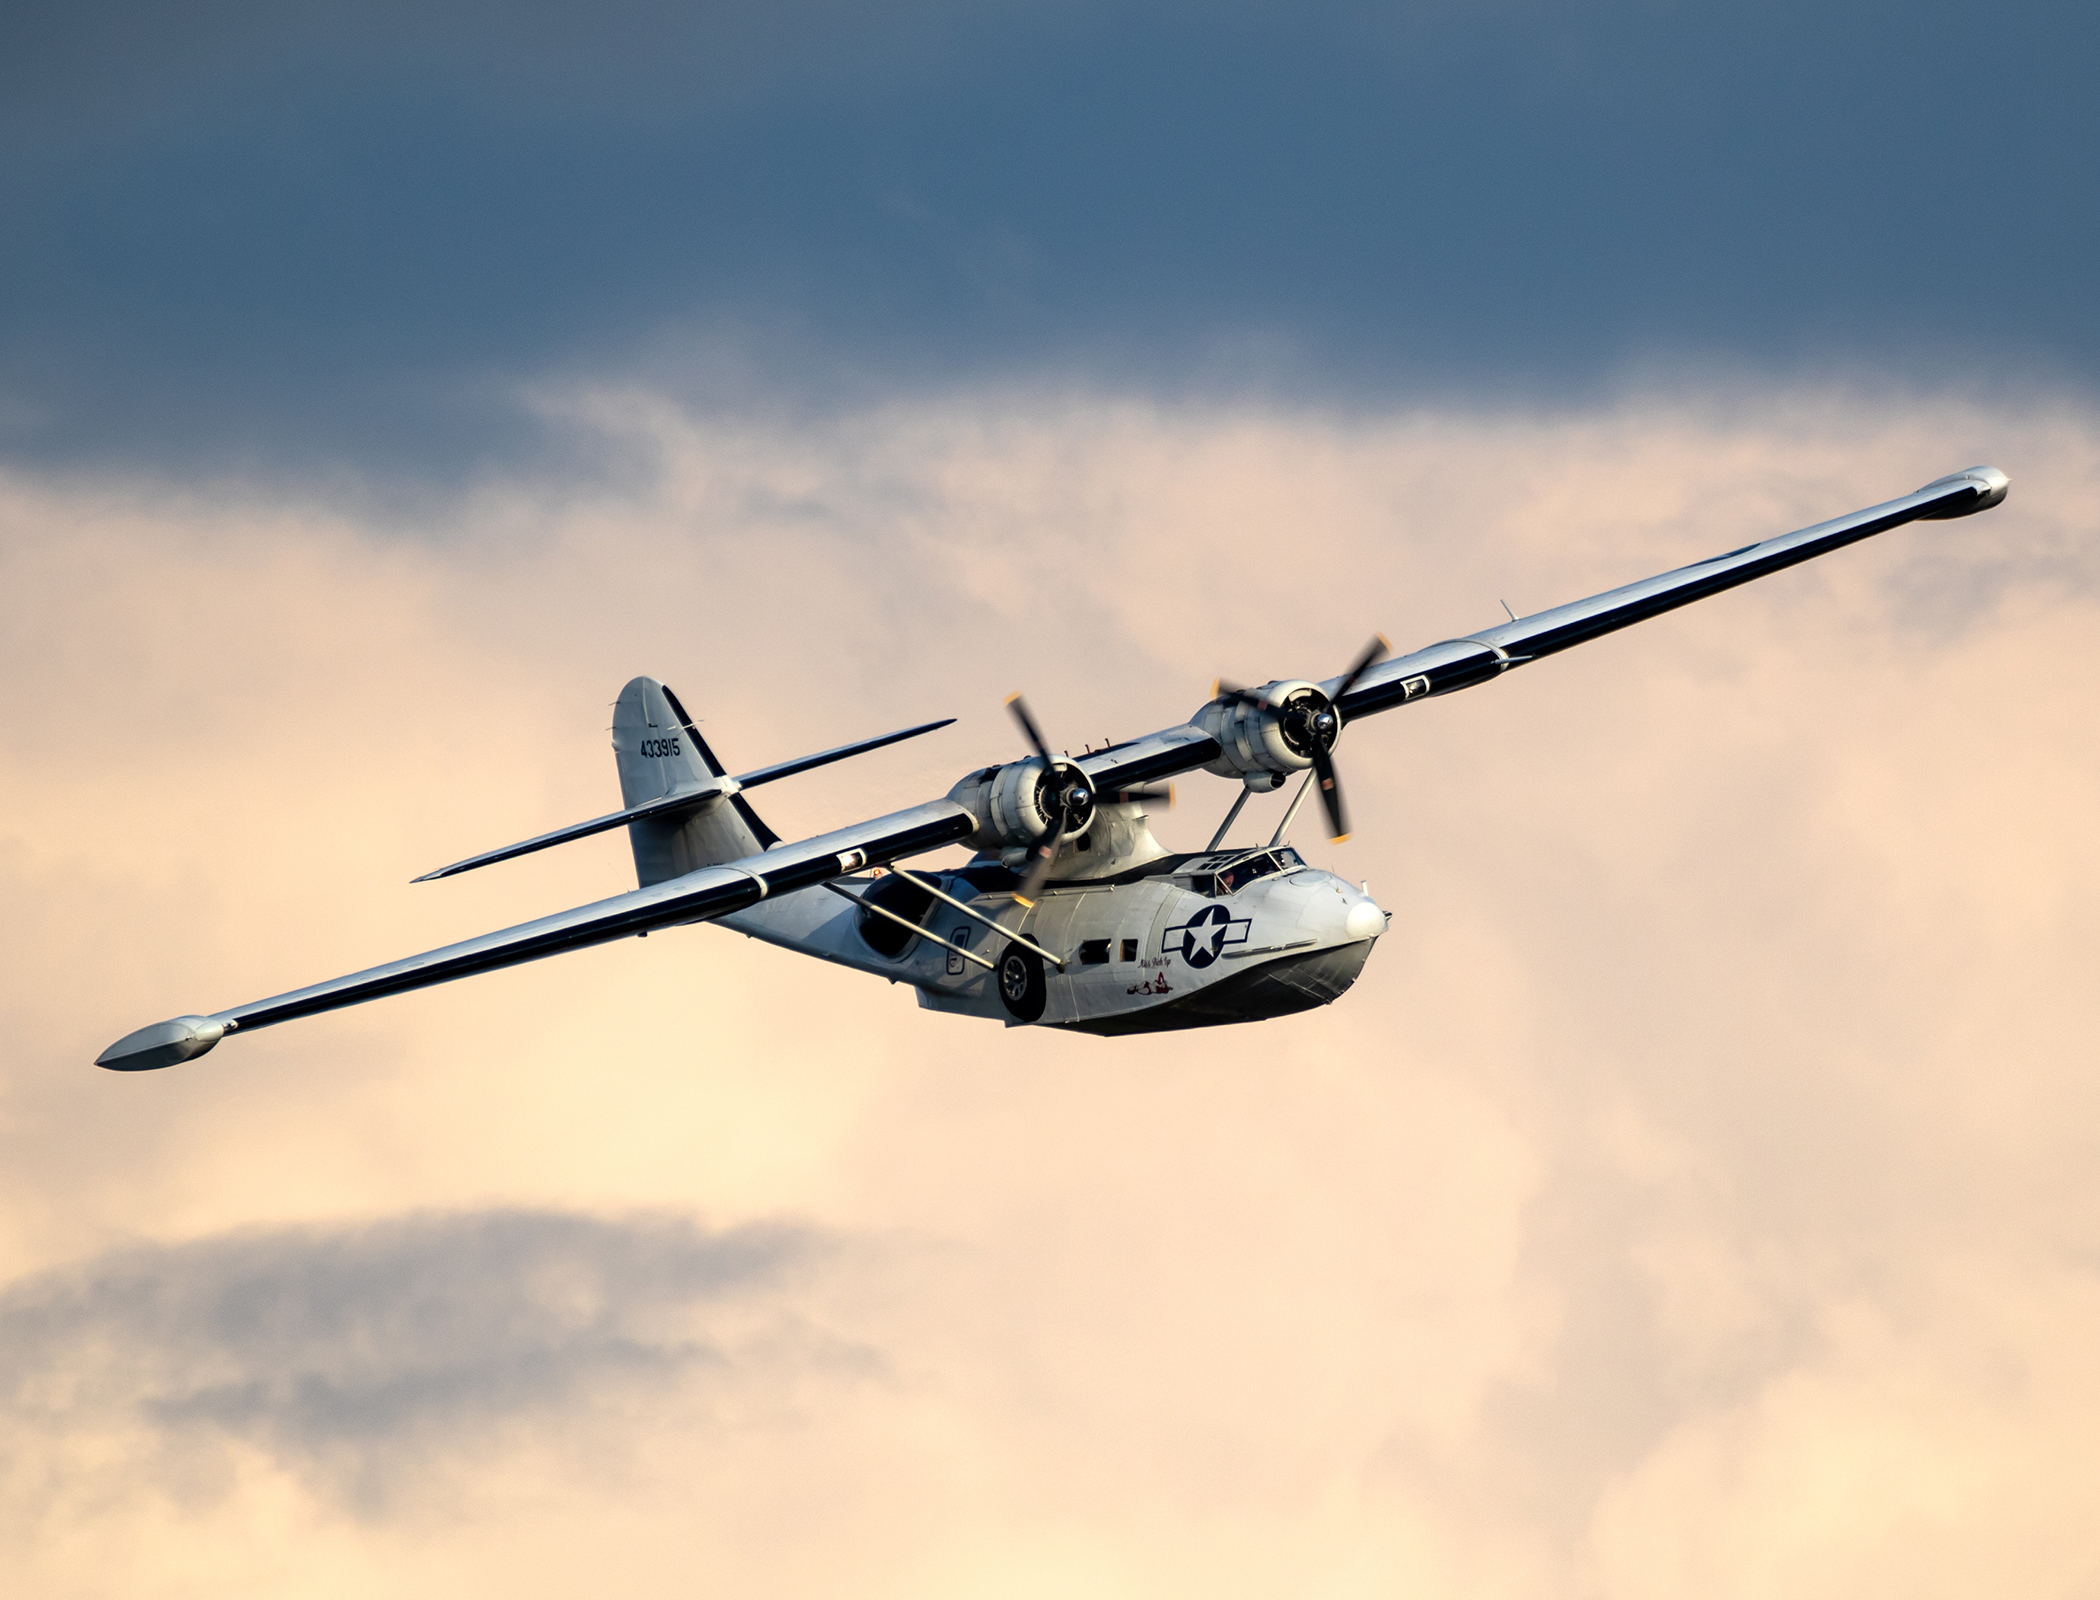 Catalina Aircraft to build new versions of famous WWII seaplane